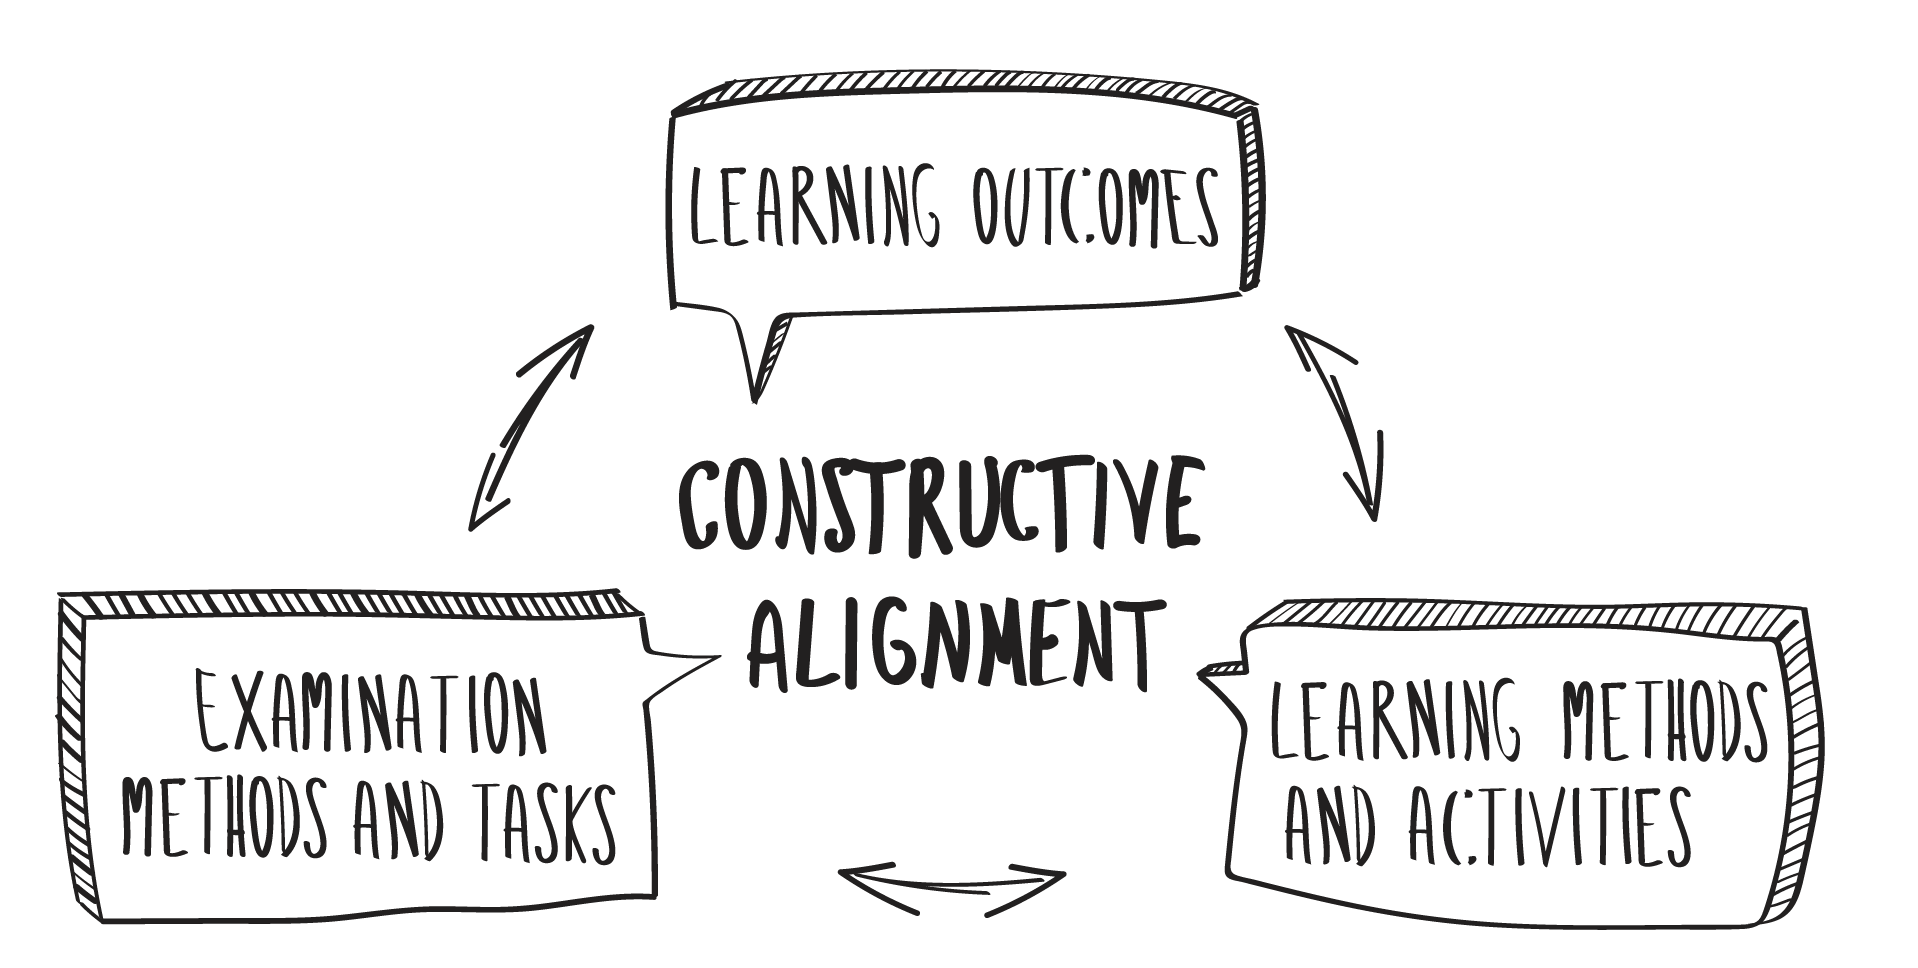 Constructive Alignment in the middle. Around it in a circle: Learning Outcomes, Learning Methods and Activities, Exam methods and tasks. Everything is connected.